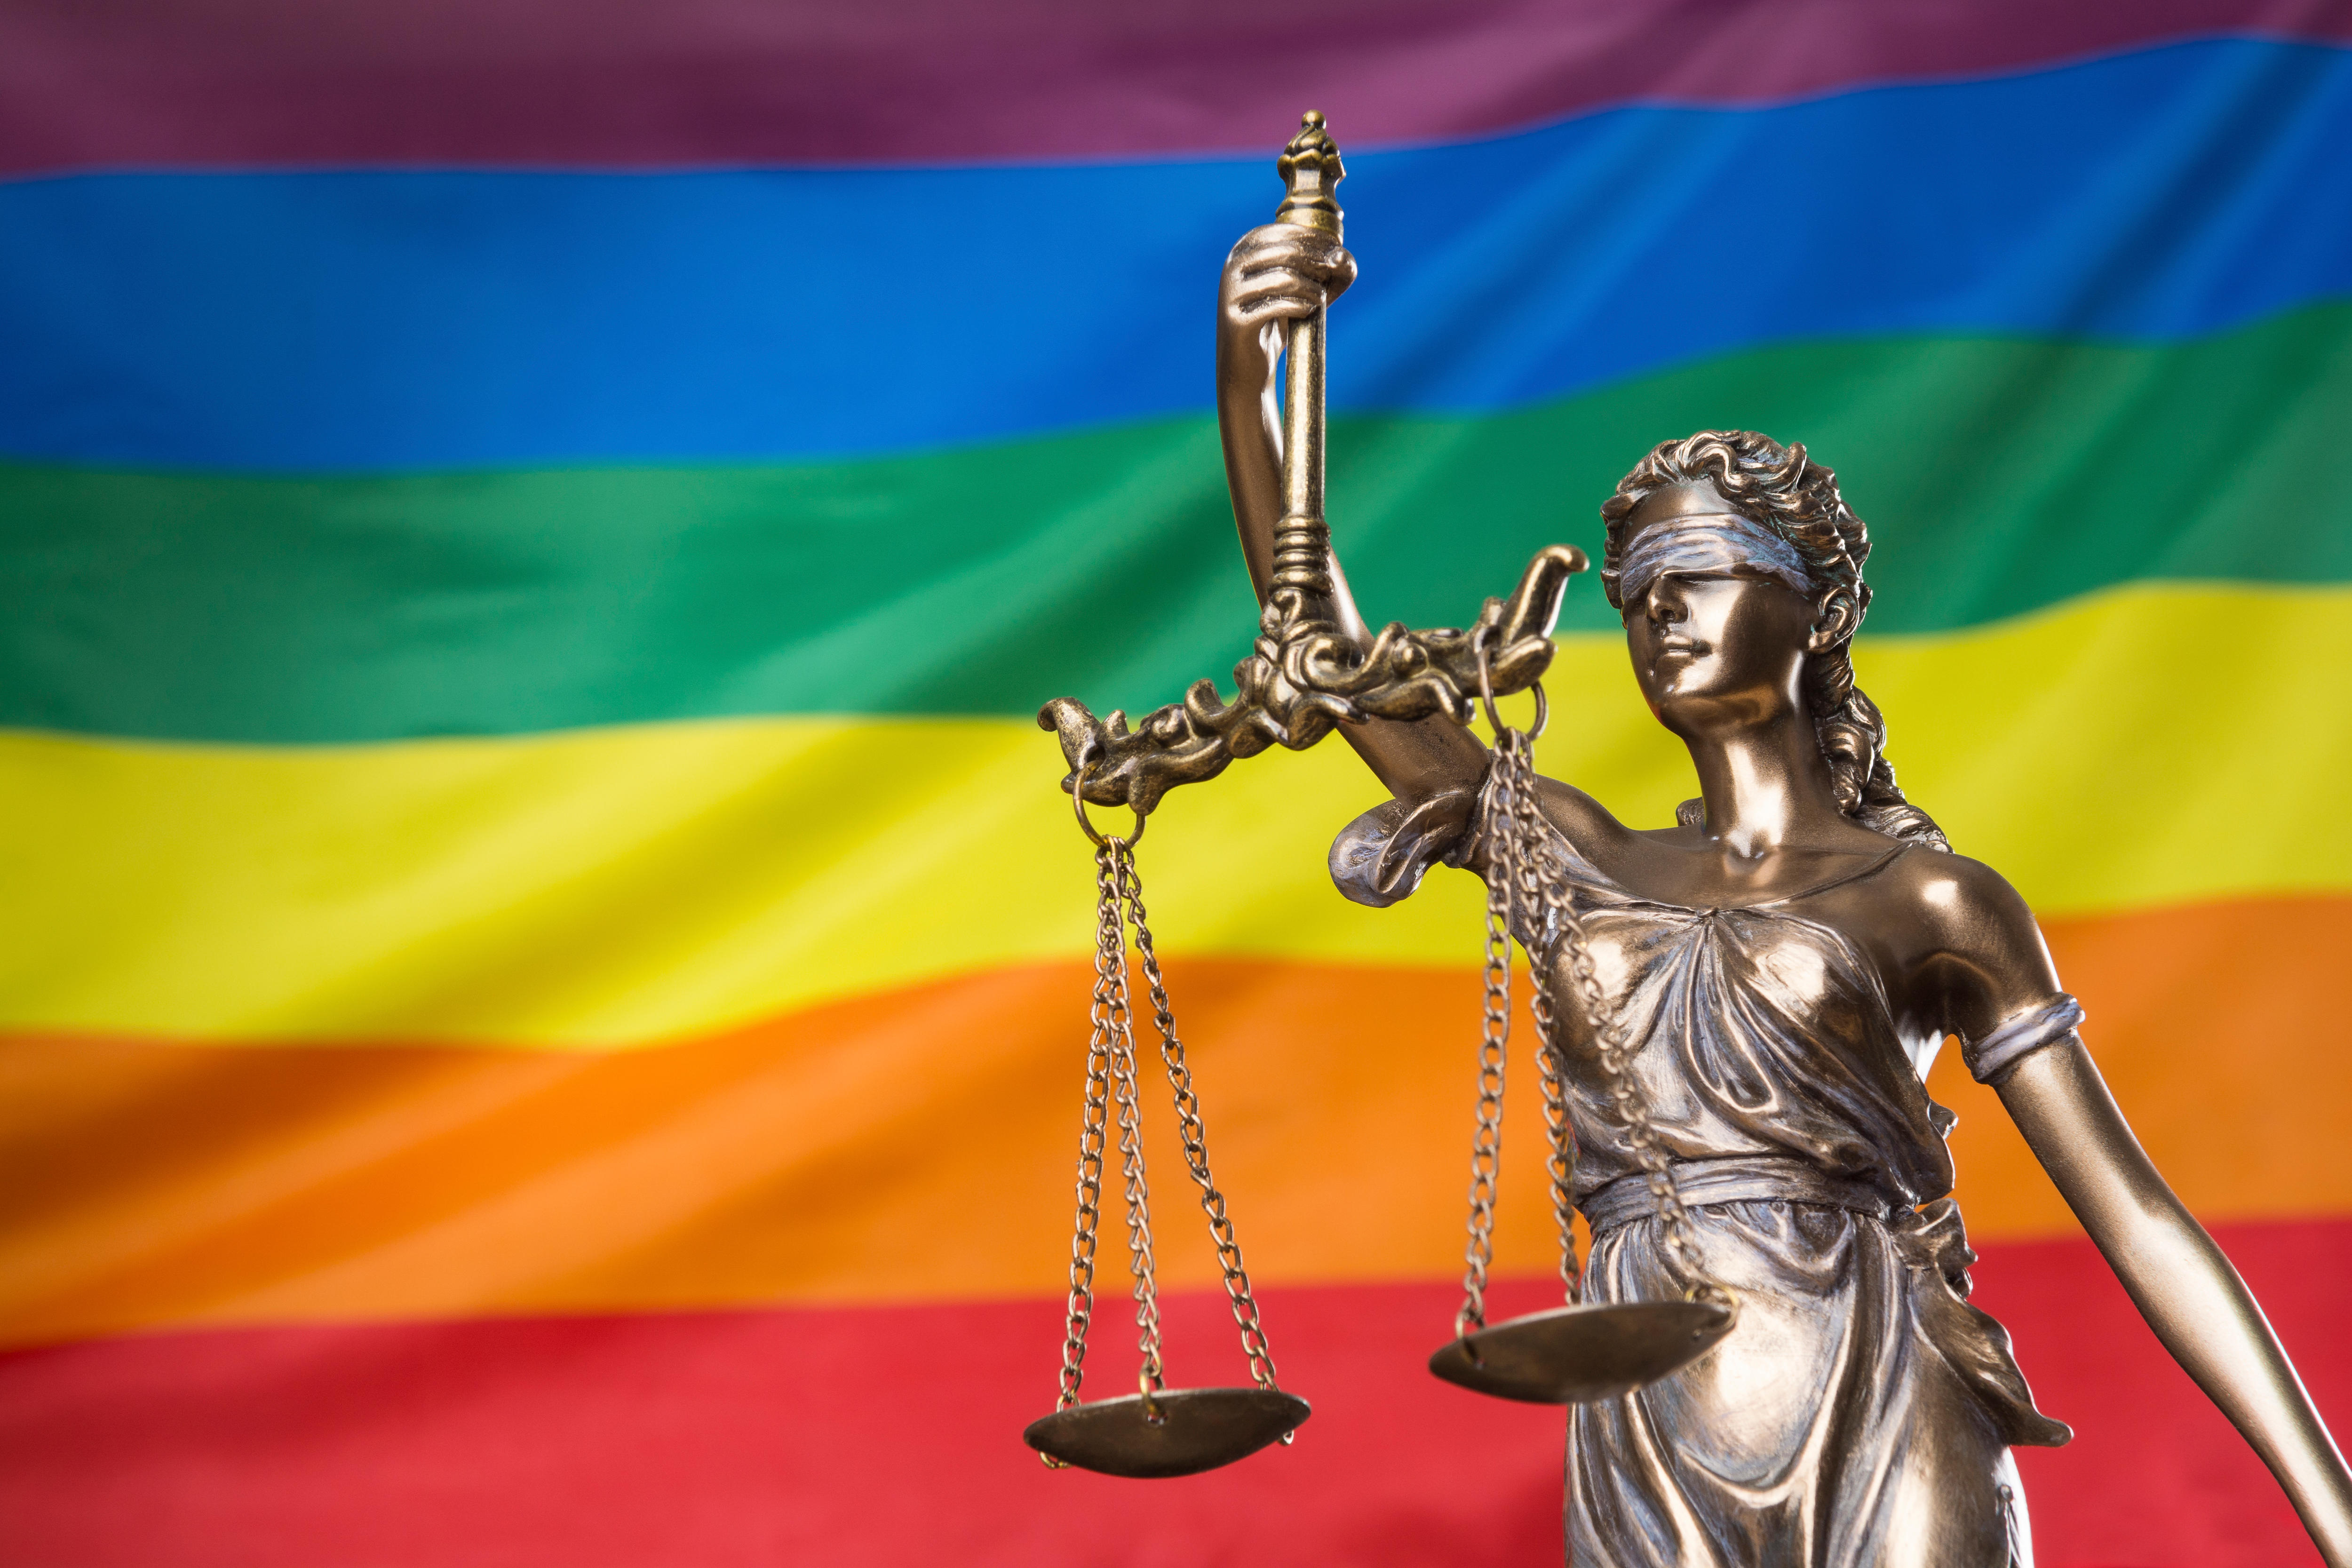 Queer journeys through the law